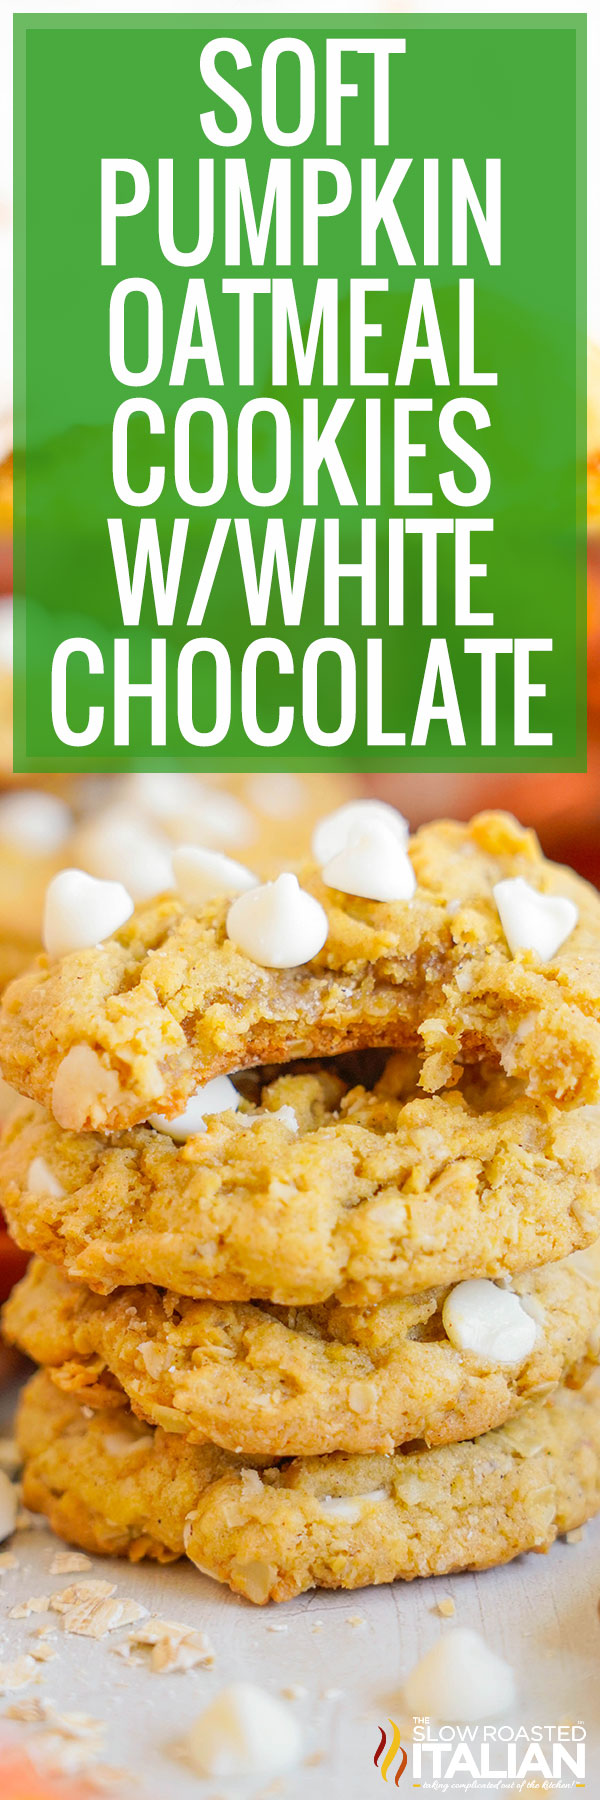 Soft Pumpkin Oatmeal Cookies With White Chocolate - PIN